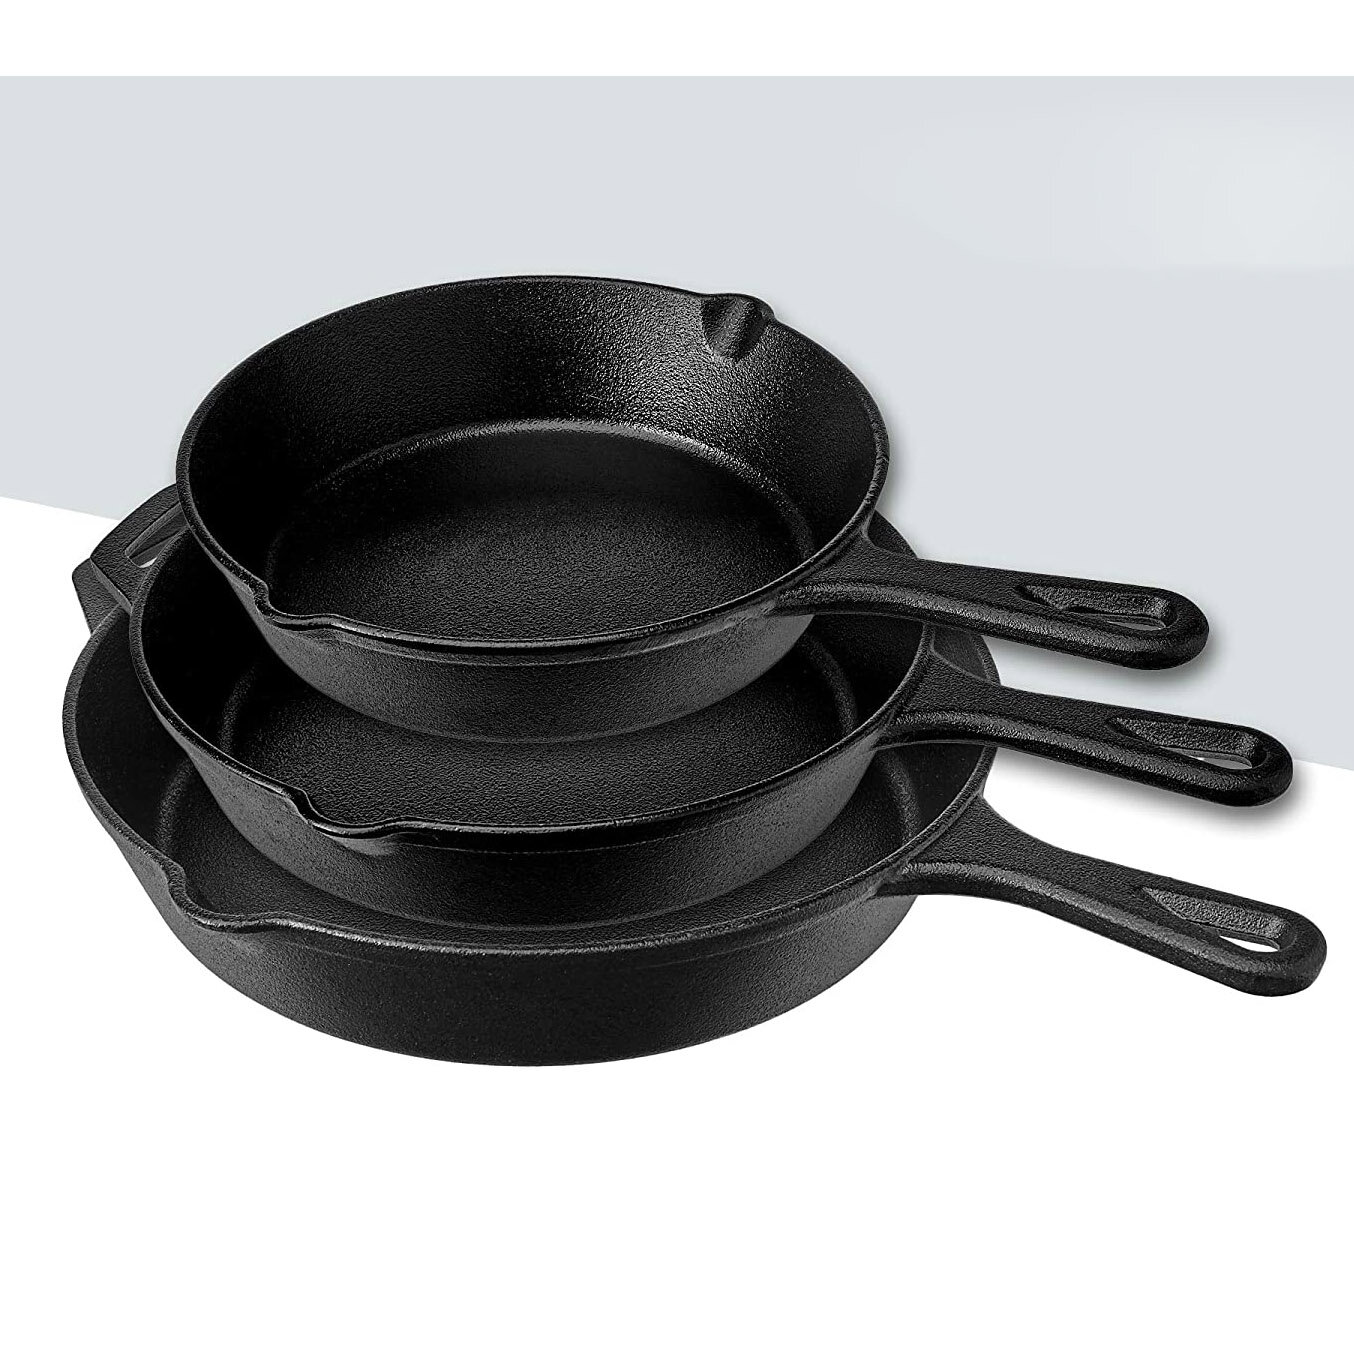 Save Big on Top Rated Cusinel Cast Iron Pans